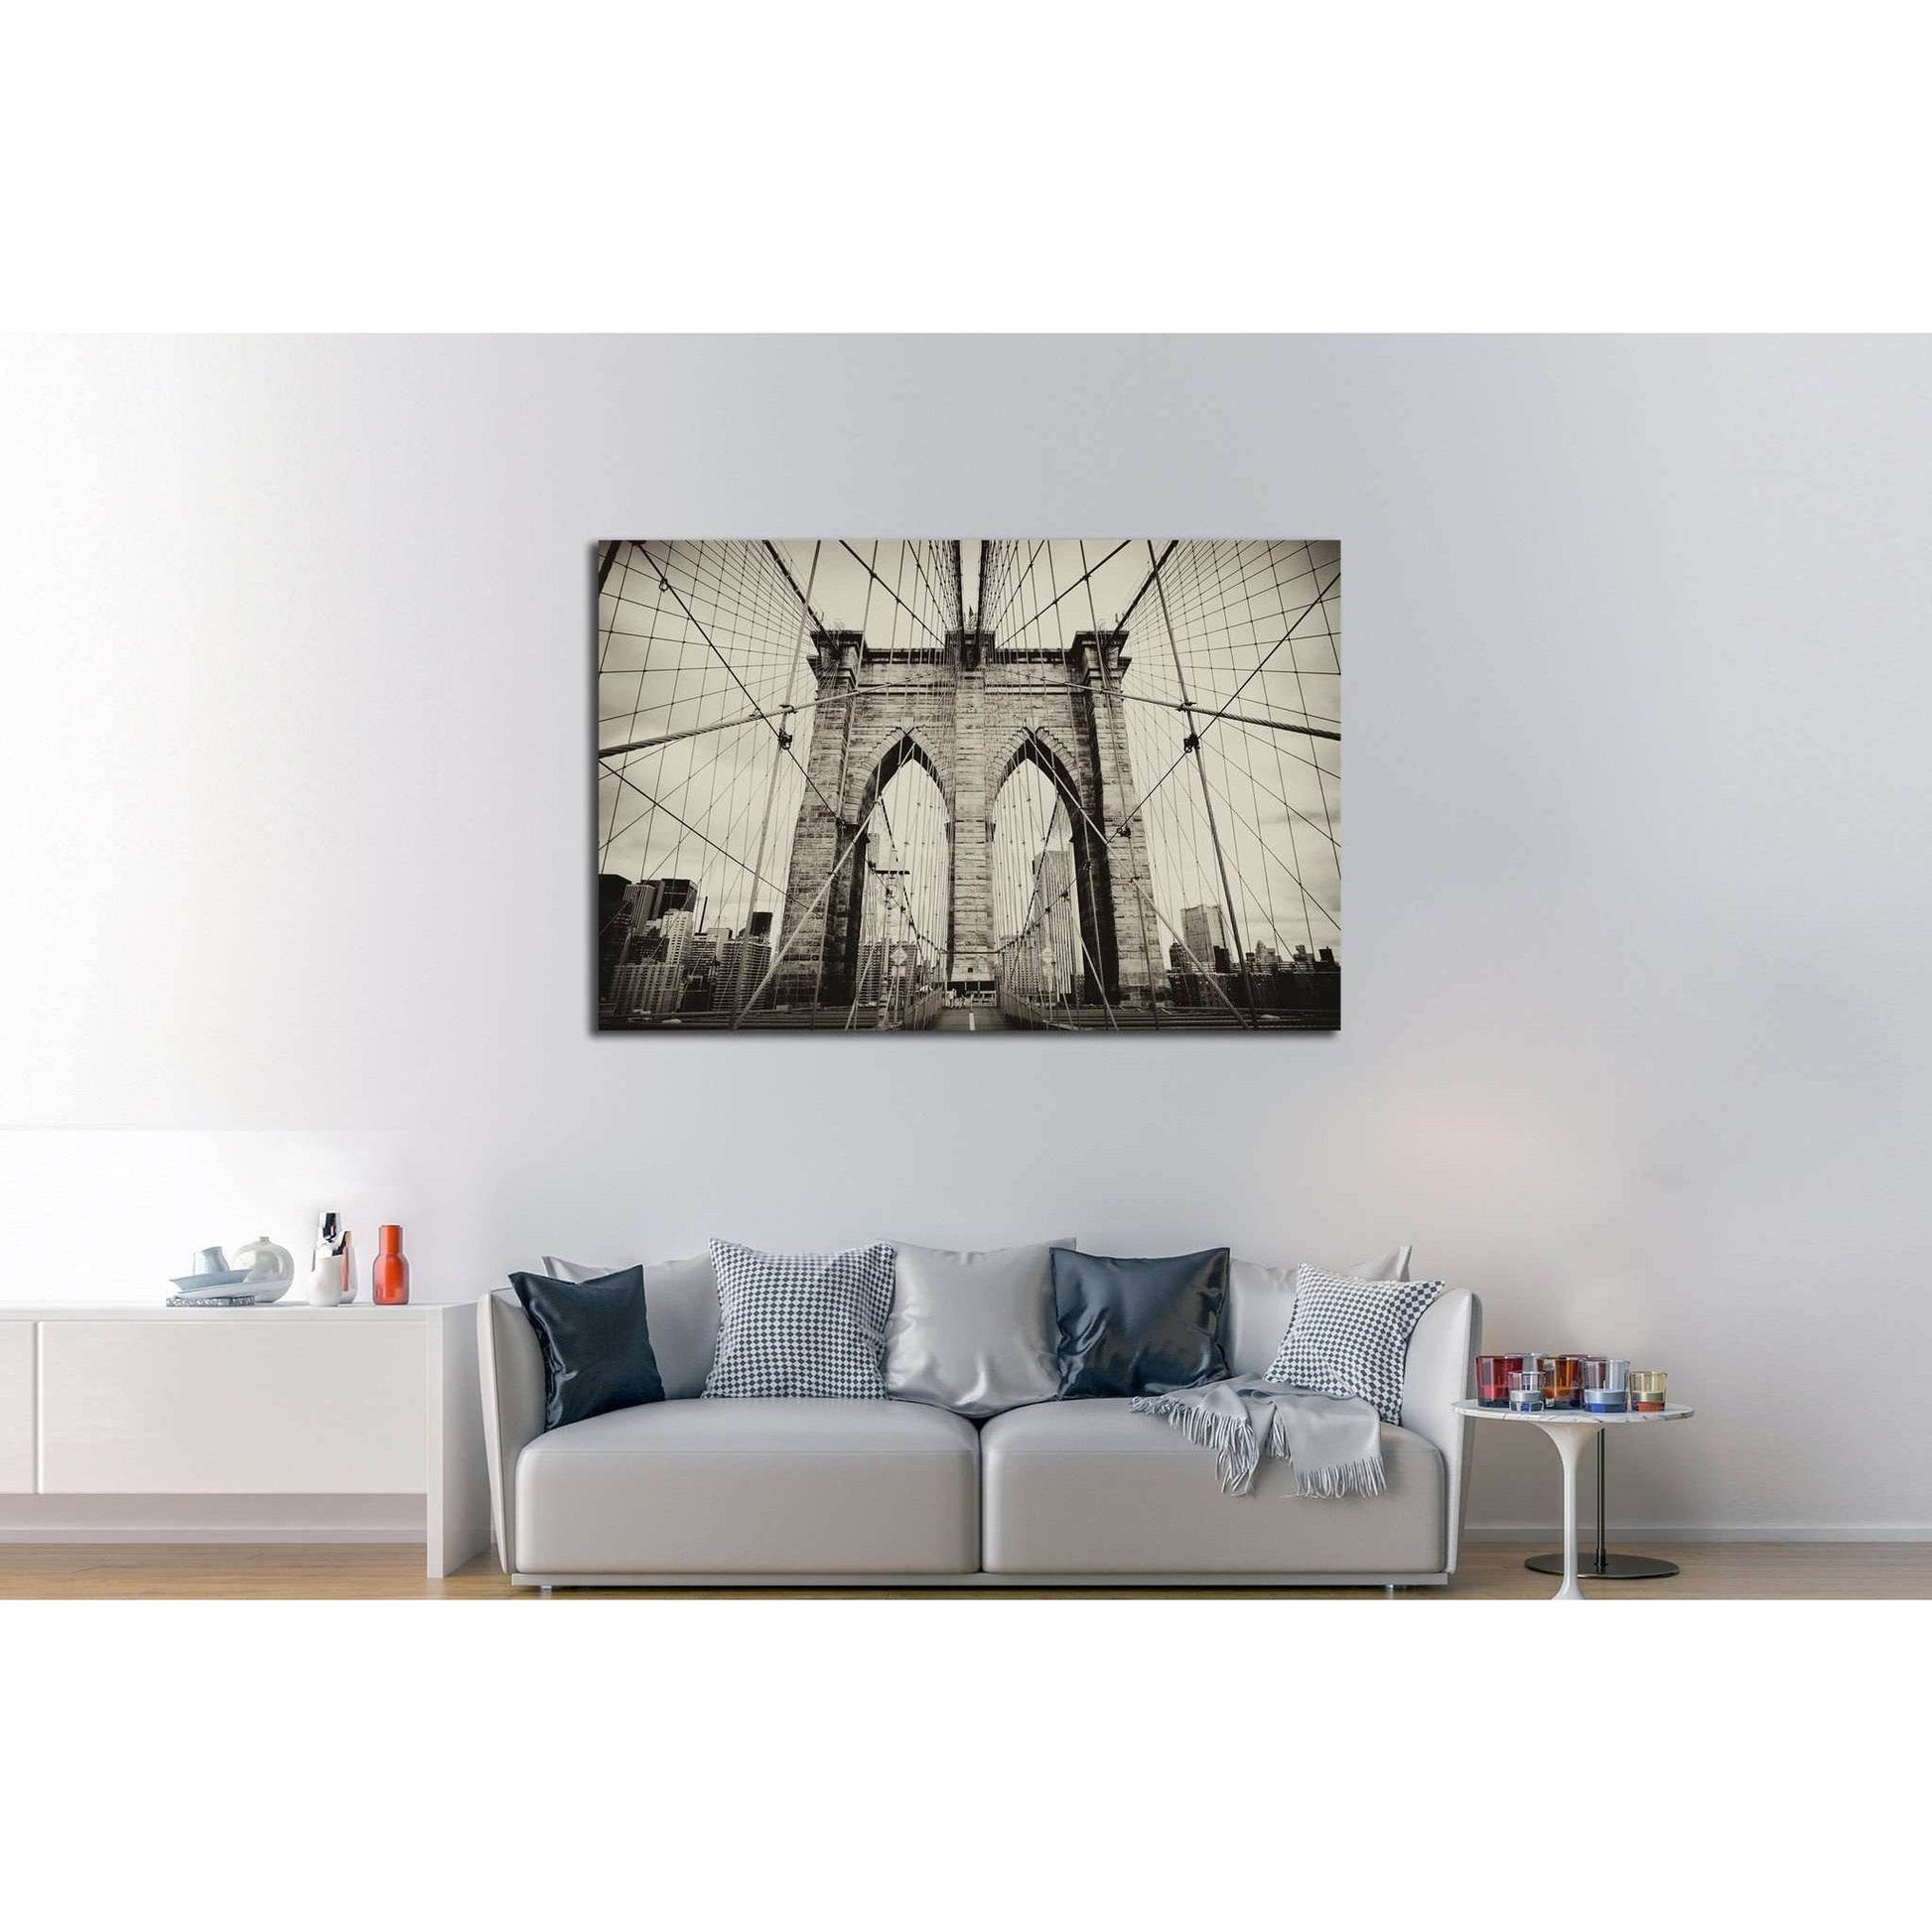 Brooklyn Bridge Wall Art PrintDecorate your walls with a stunning Brooklyn Bridge Canvas Art Print from the world's largest art gallery. Choose from thousands of Brooklyn Bridge artworks with various sizing options. Choose your perfect art print to comple